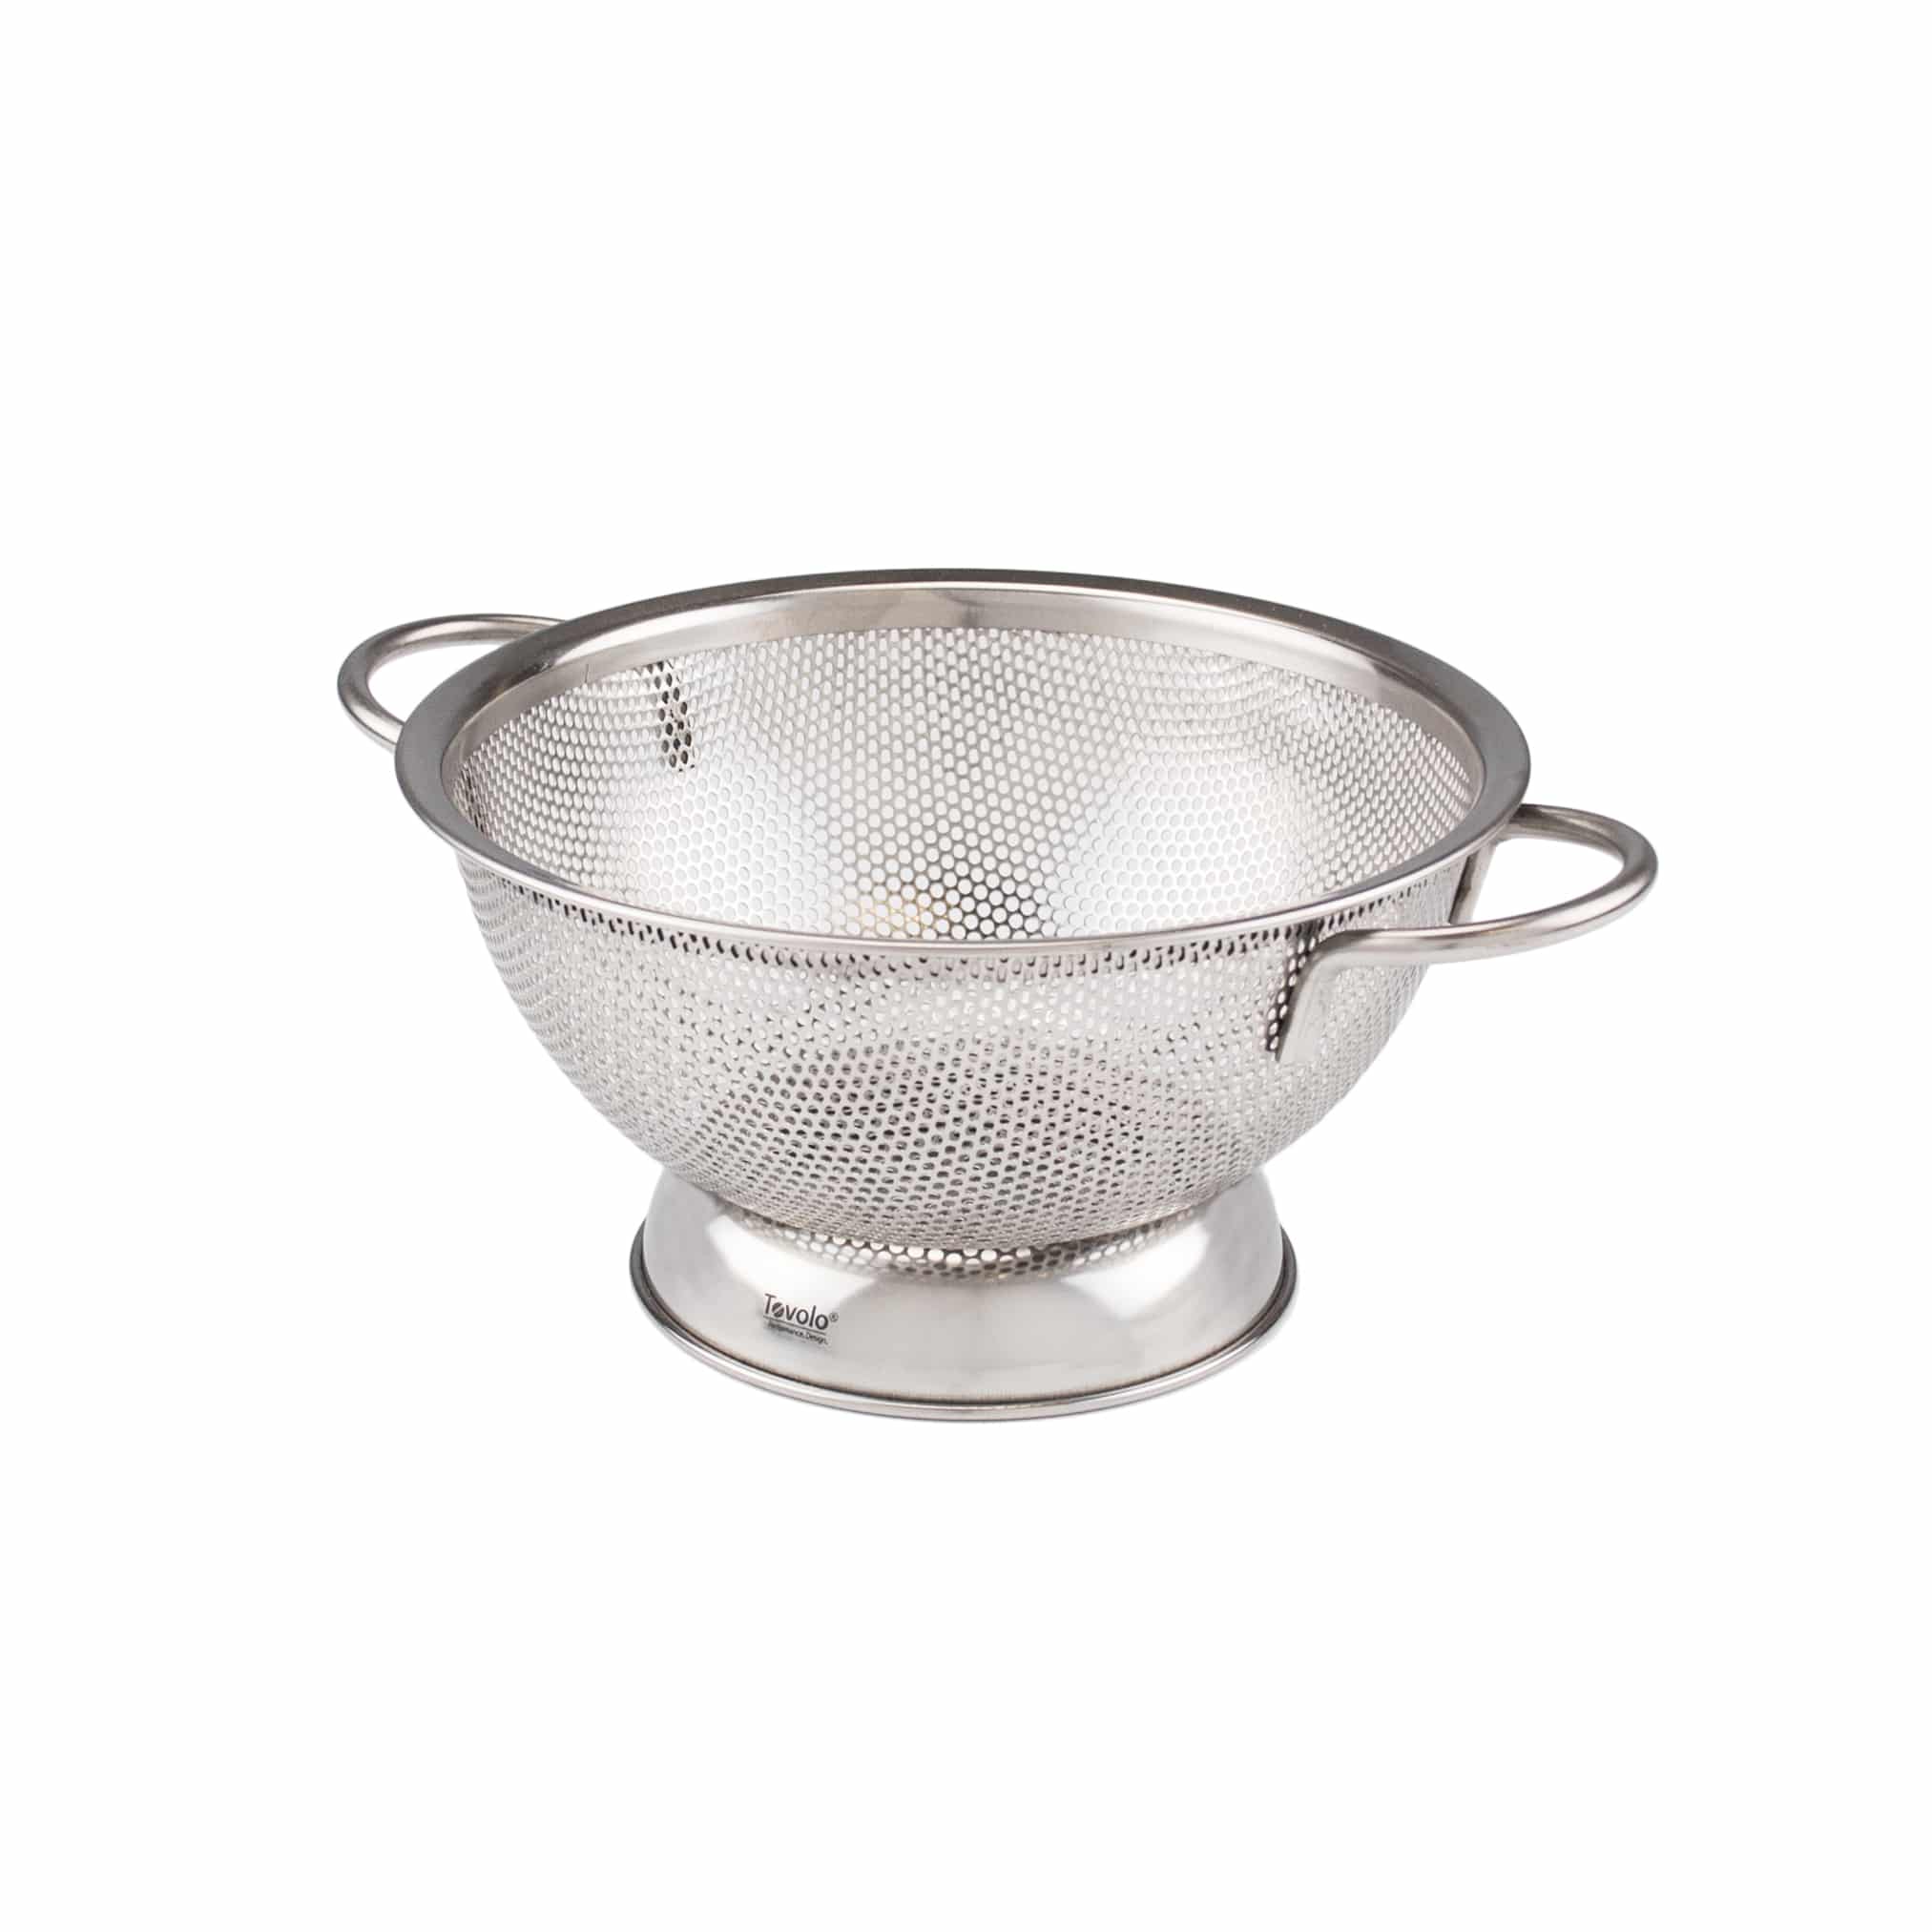 Tovolo Colander Small Perforated Stainless Steel